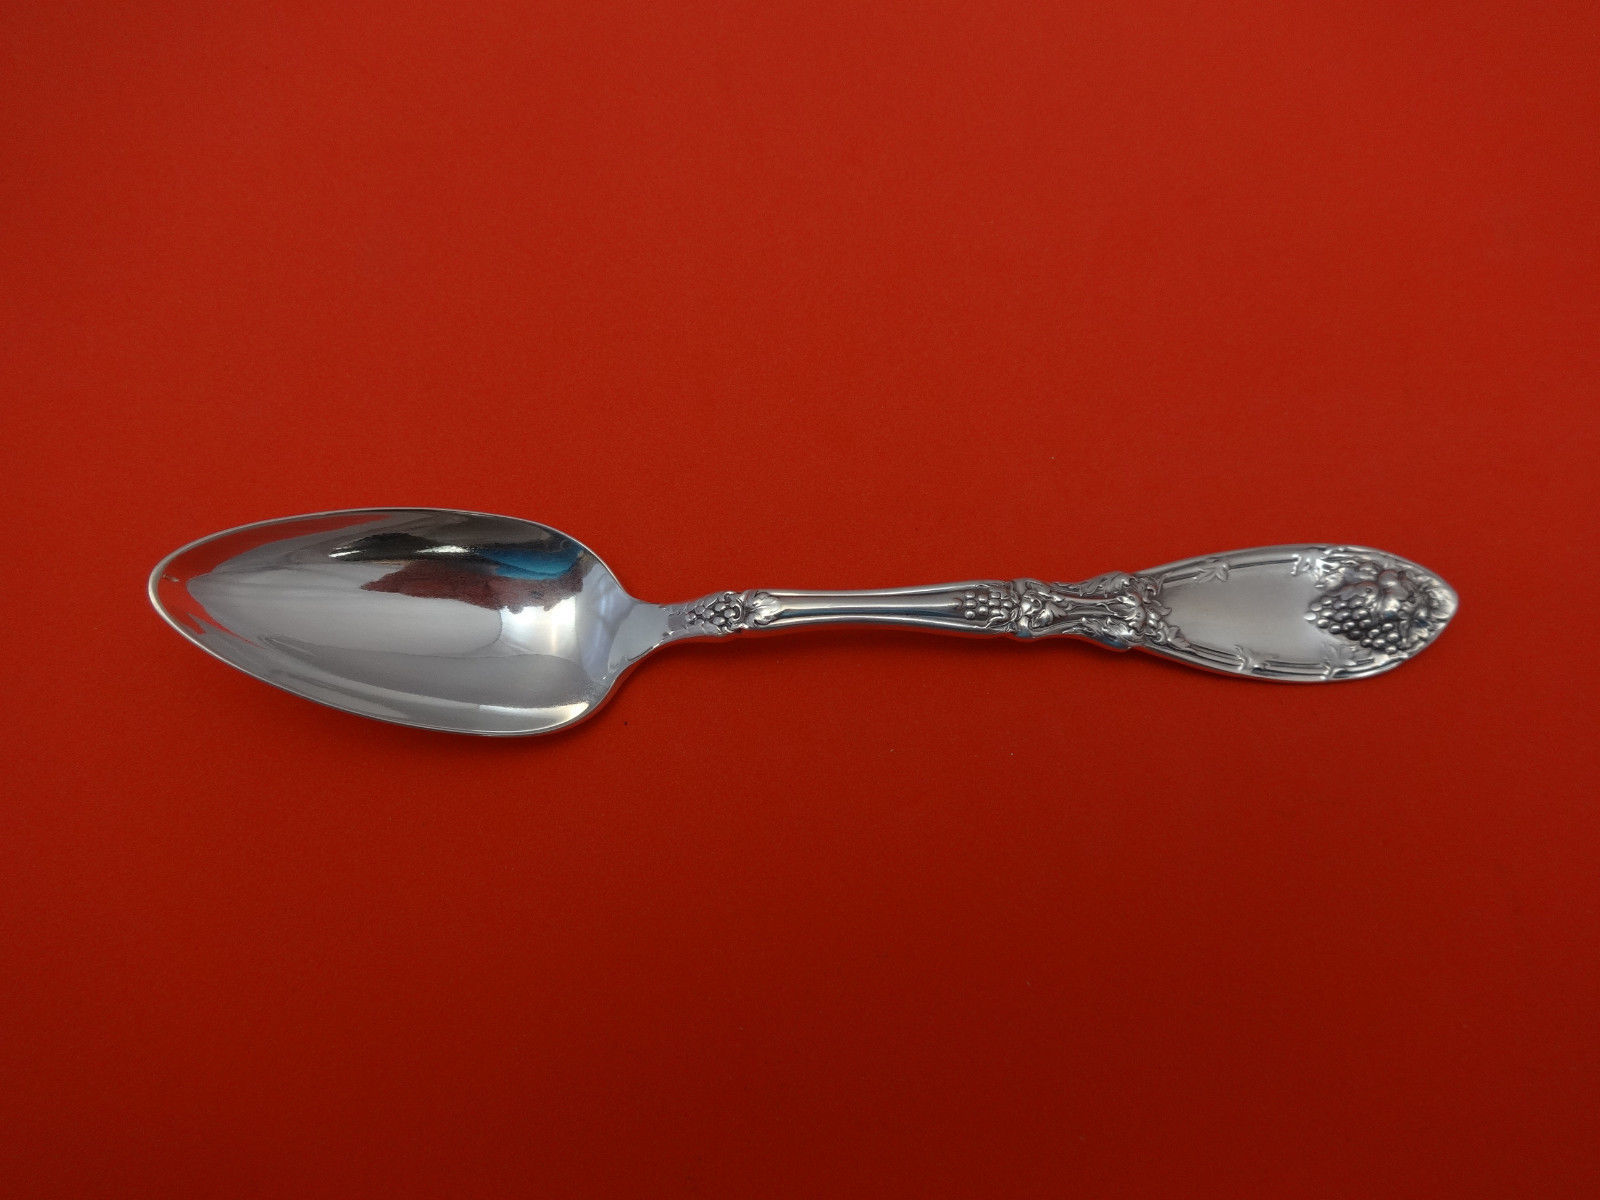 Primary image for La Vigne by 1881 Rogers Plate Silverplate Grapefruit Spoon Plain Bowl 5 7/8"